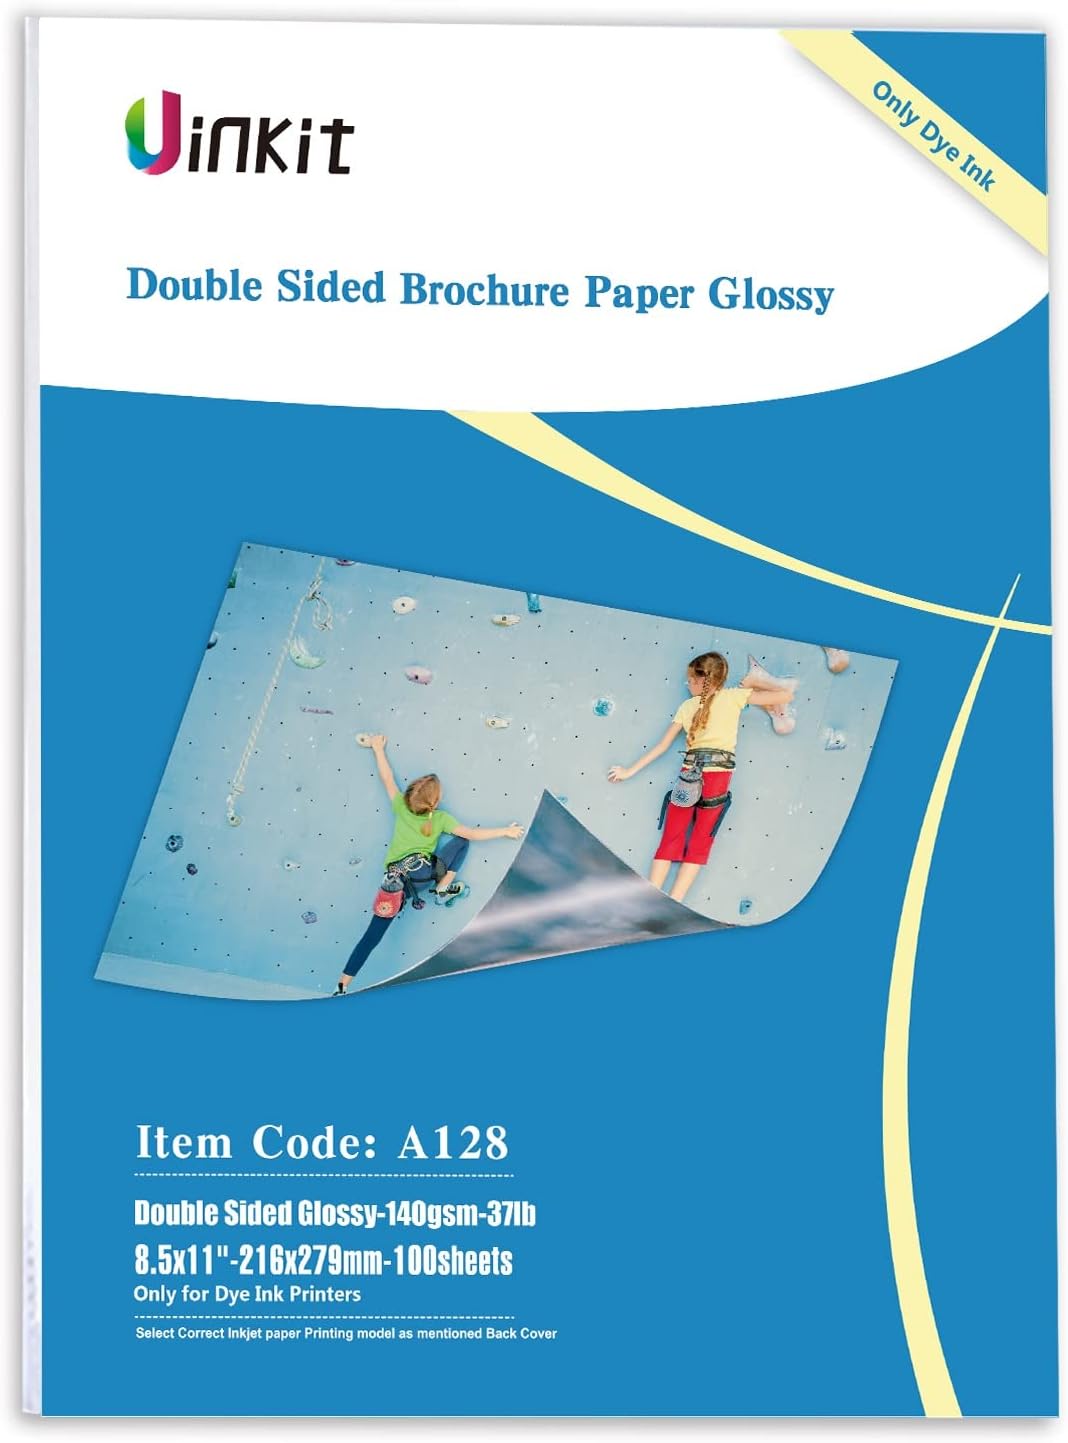 Uinkit 100 sheets Brochure Paper Glossy Double Sided [...]